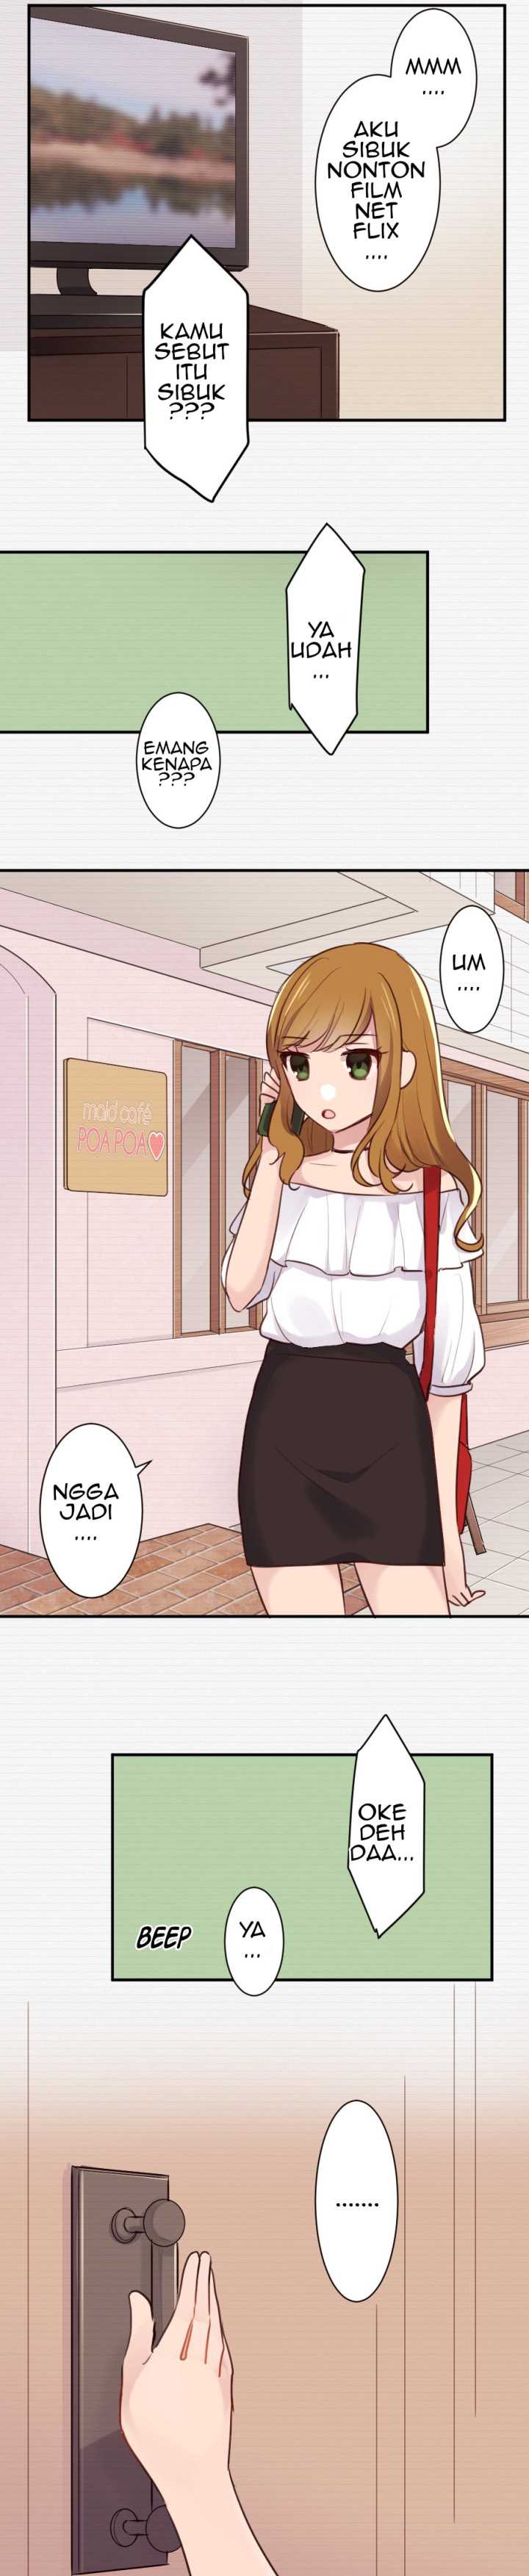 Class Maid Chapter 20